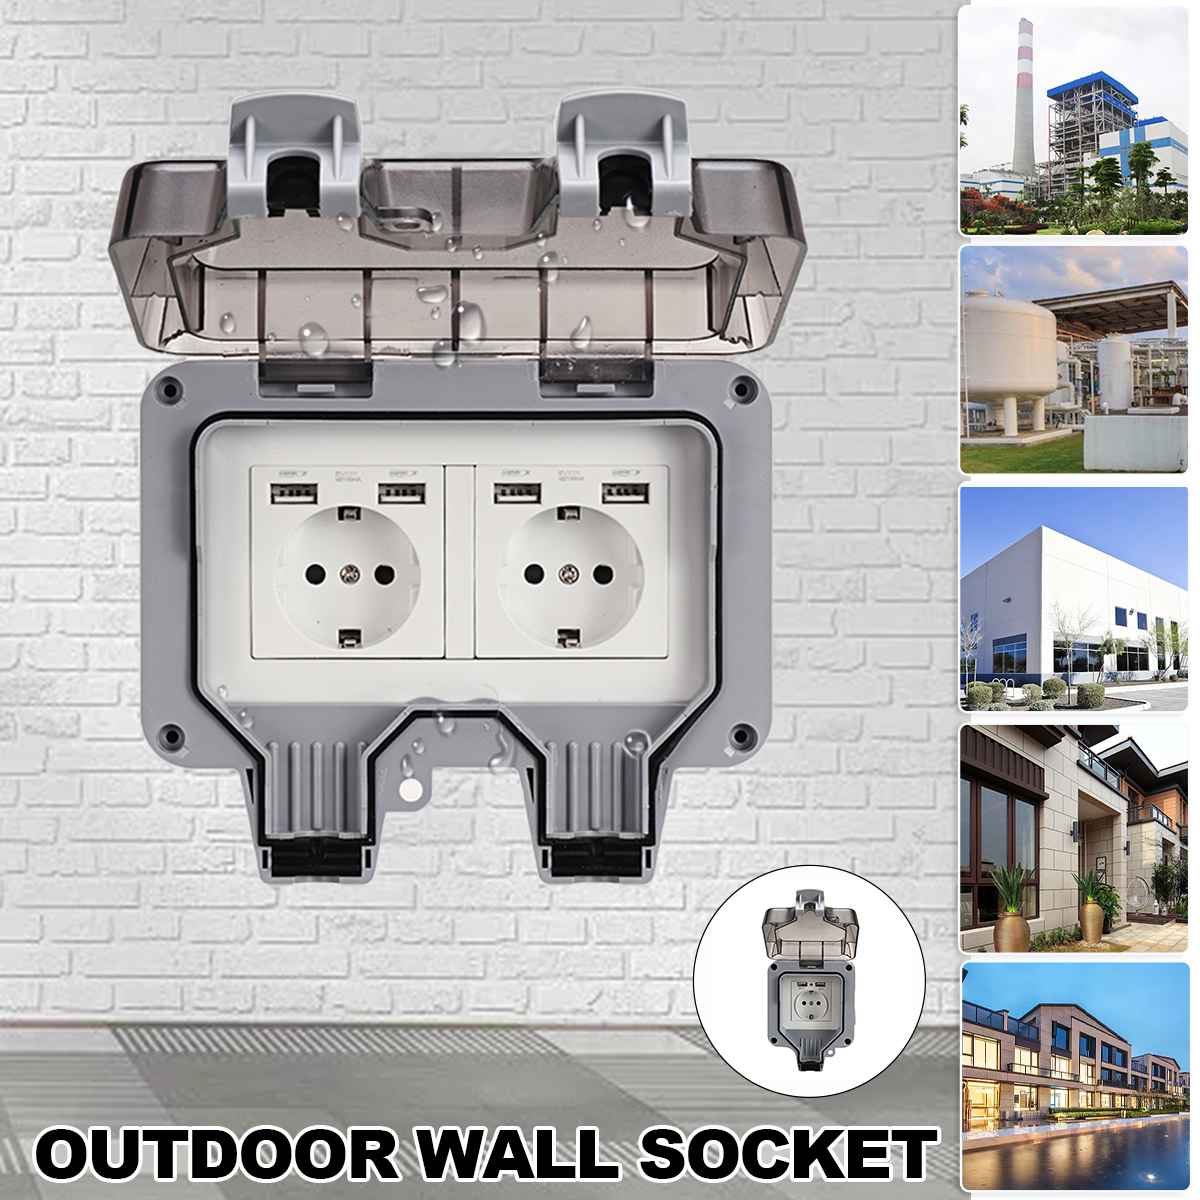 Outdoor-Waterproof-USB-Socket-Wall-Outlet-Air-Conditioner-Outlet-EU-UK-US-GER-PLUG-1947360-1